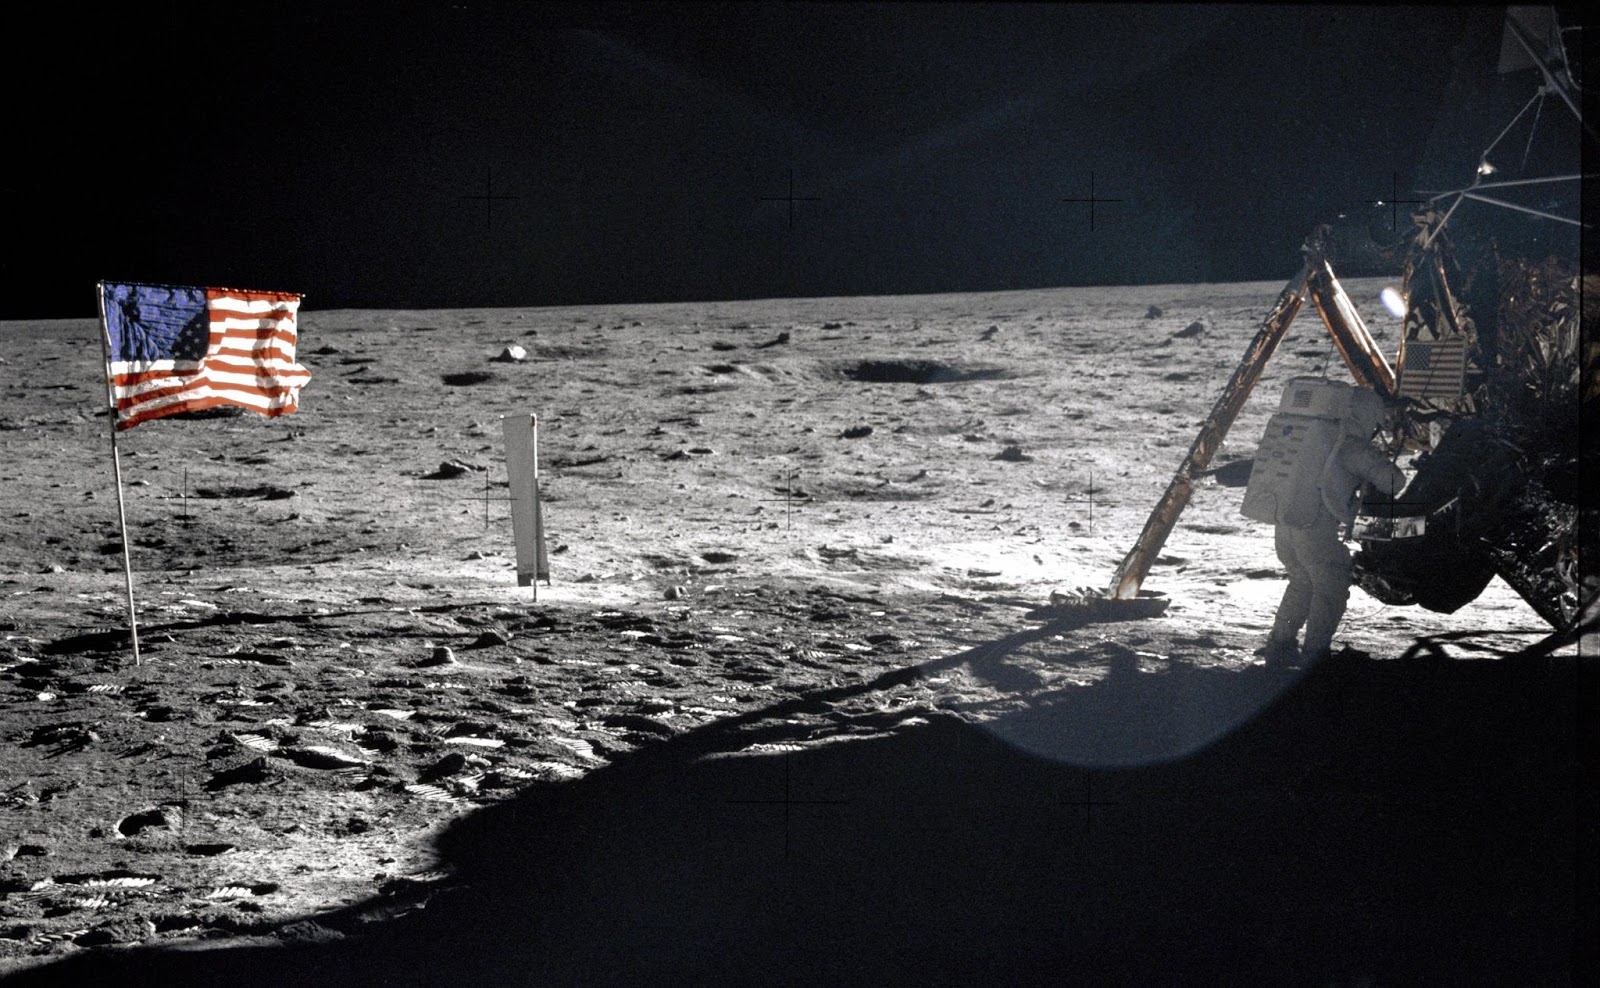 An astronaut descends the lunar module ladder beside the American flag on the moon's surface.